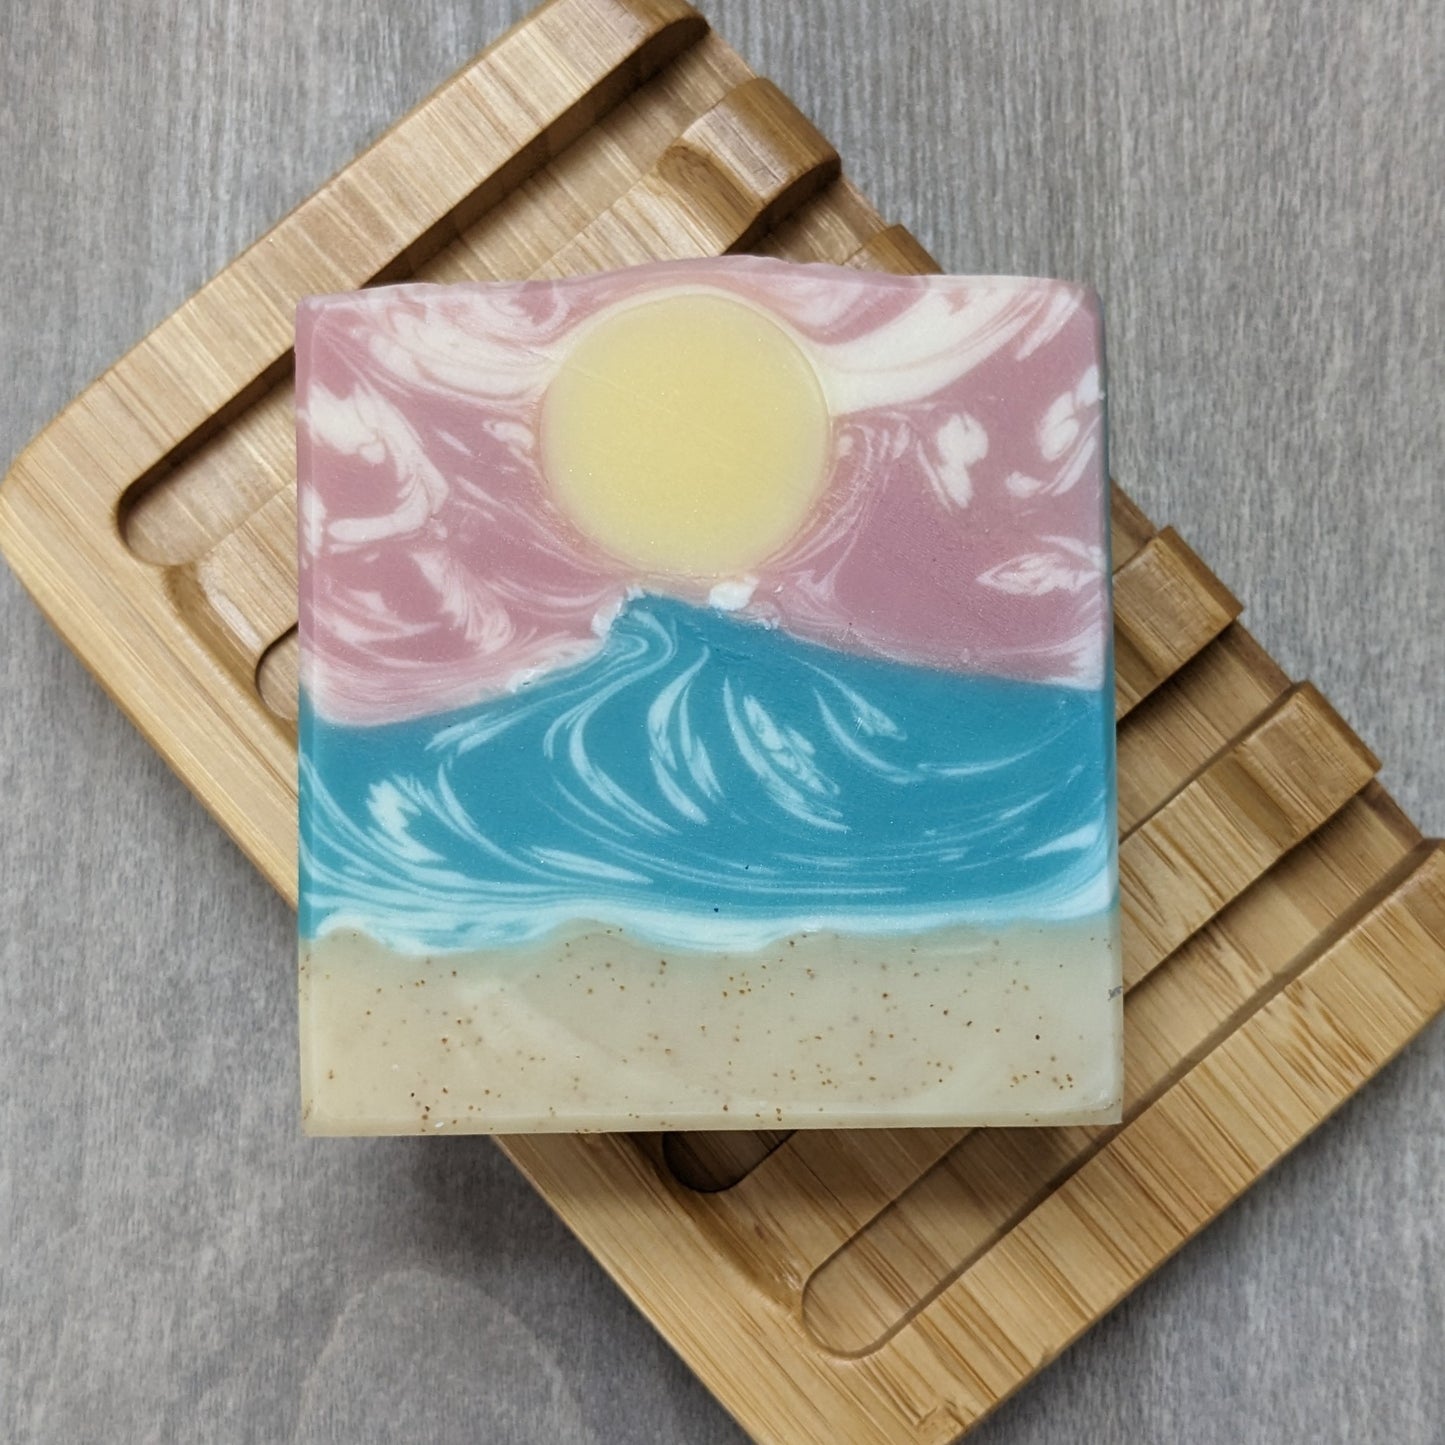 Soap with sand and wave design on soap dish